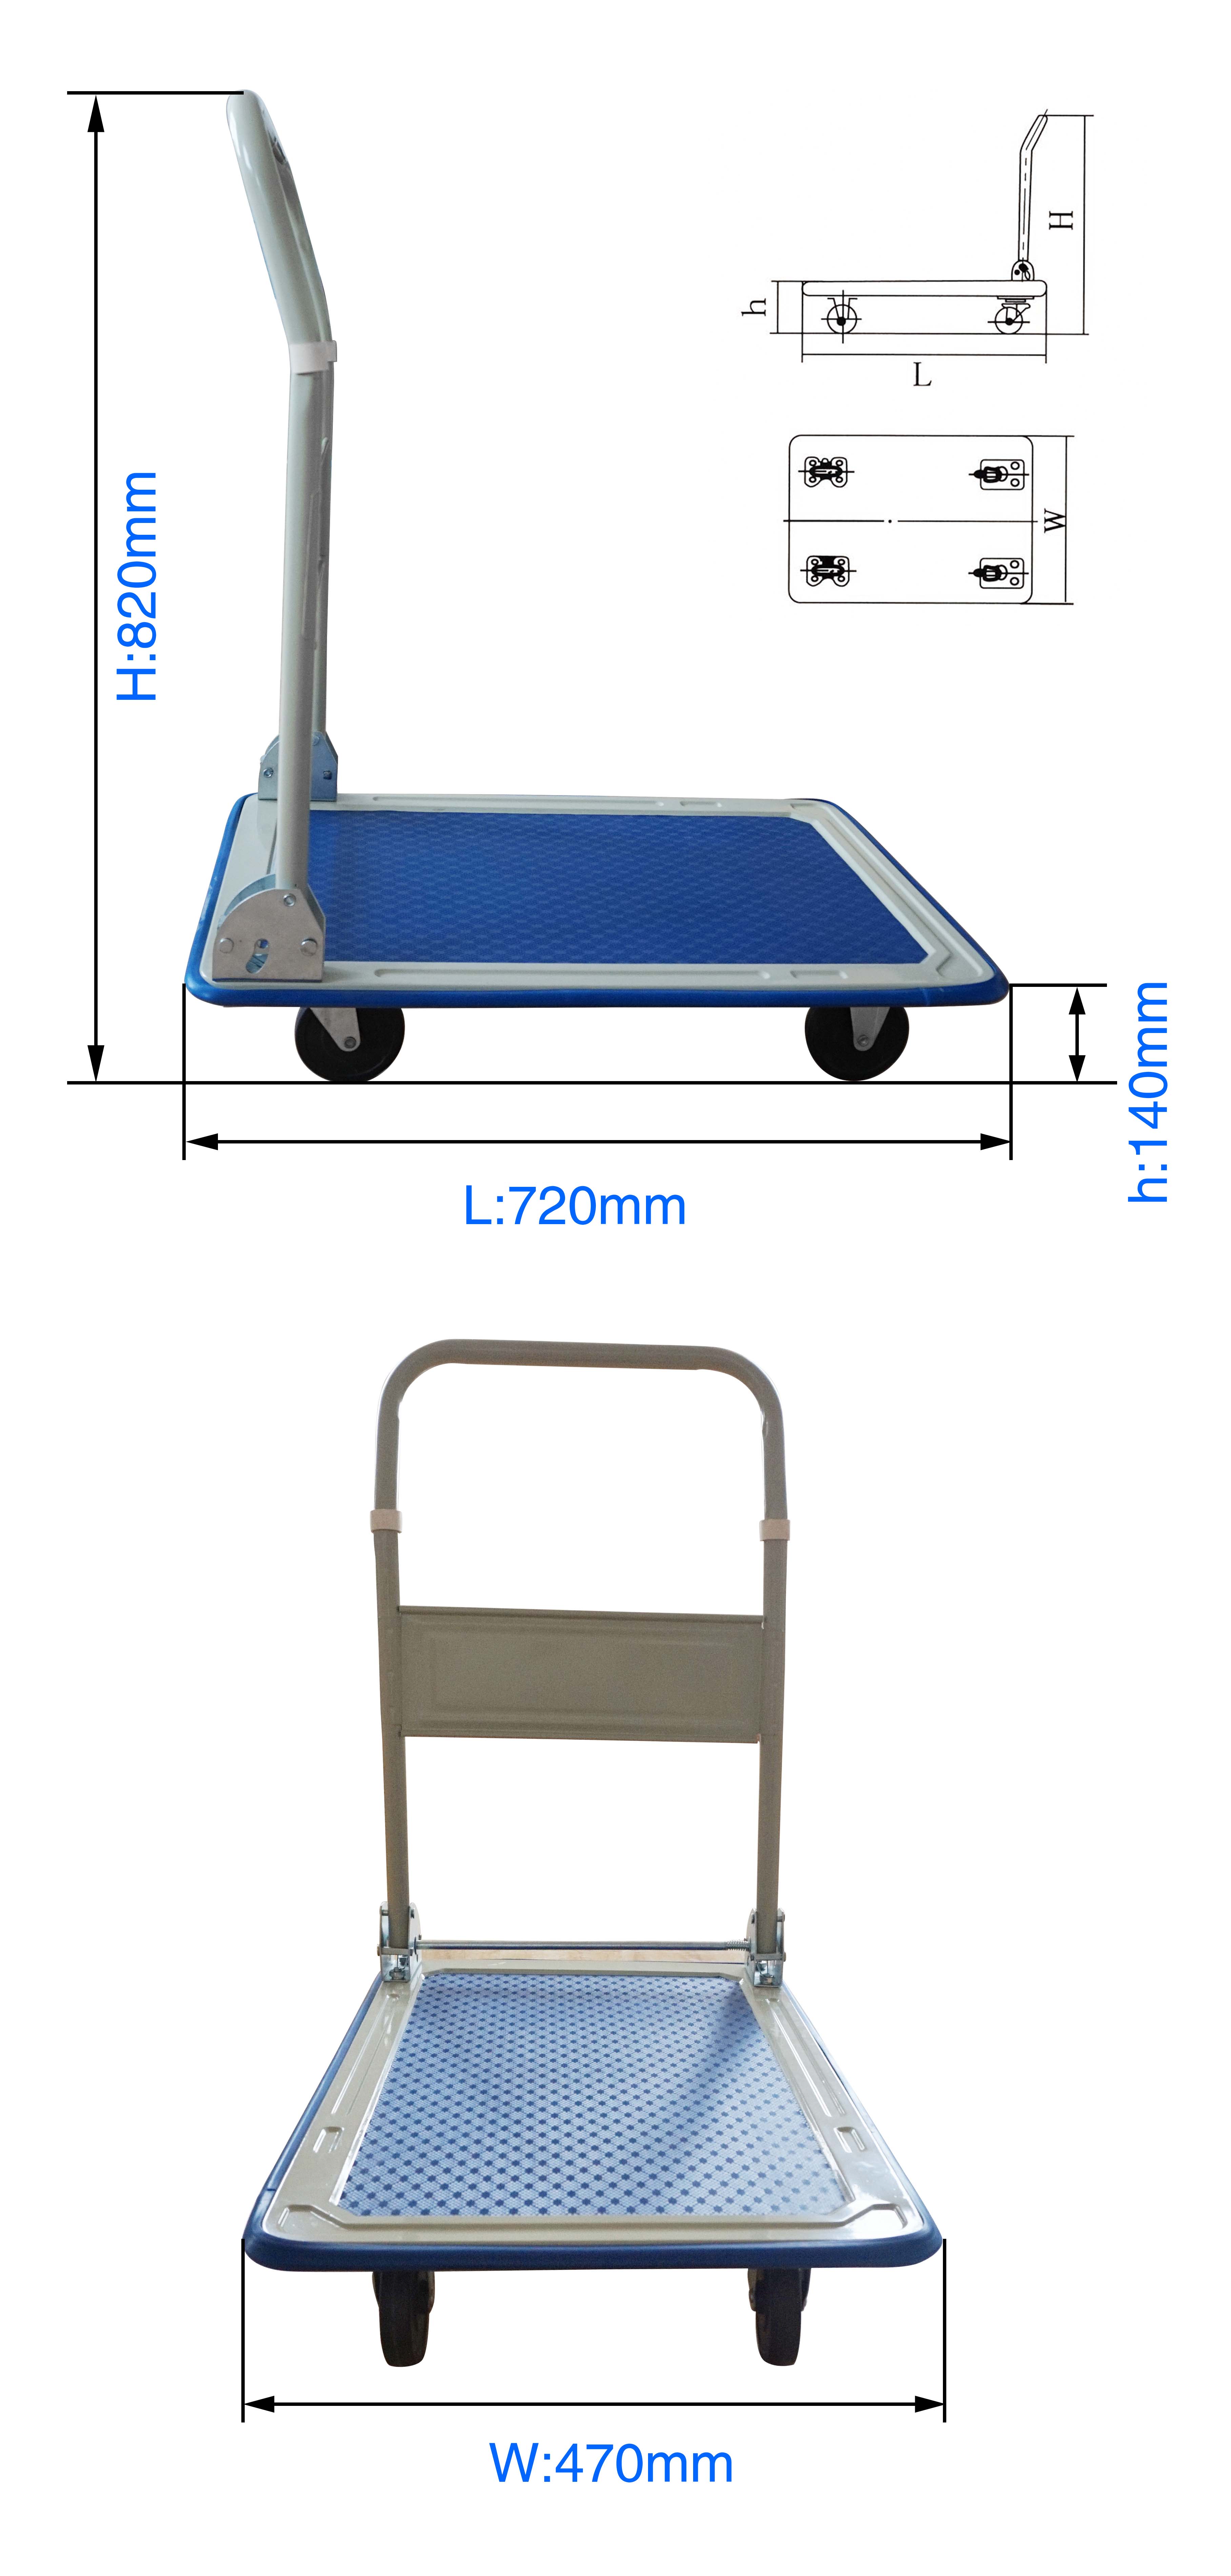 PH150 Platform Hand Truck, Folding Push Hand Dolly Cart for Loading and Storage, with 4" Caster Wheel, 150kg Load Capacity factory